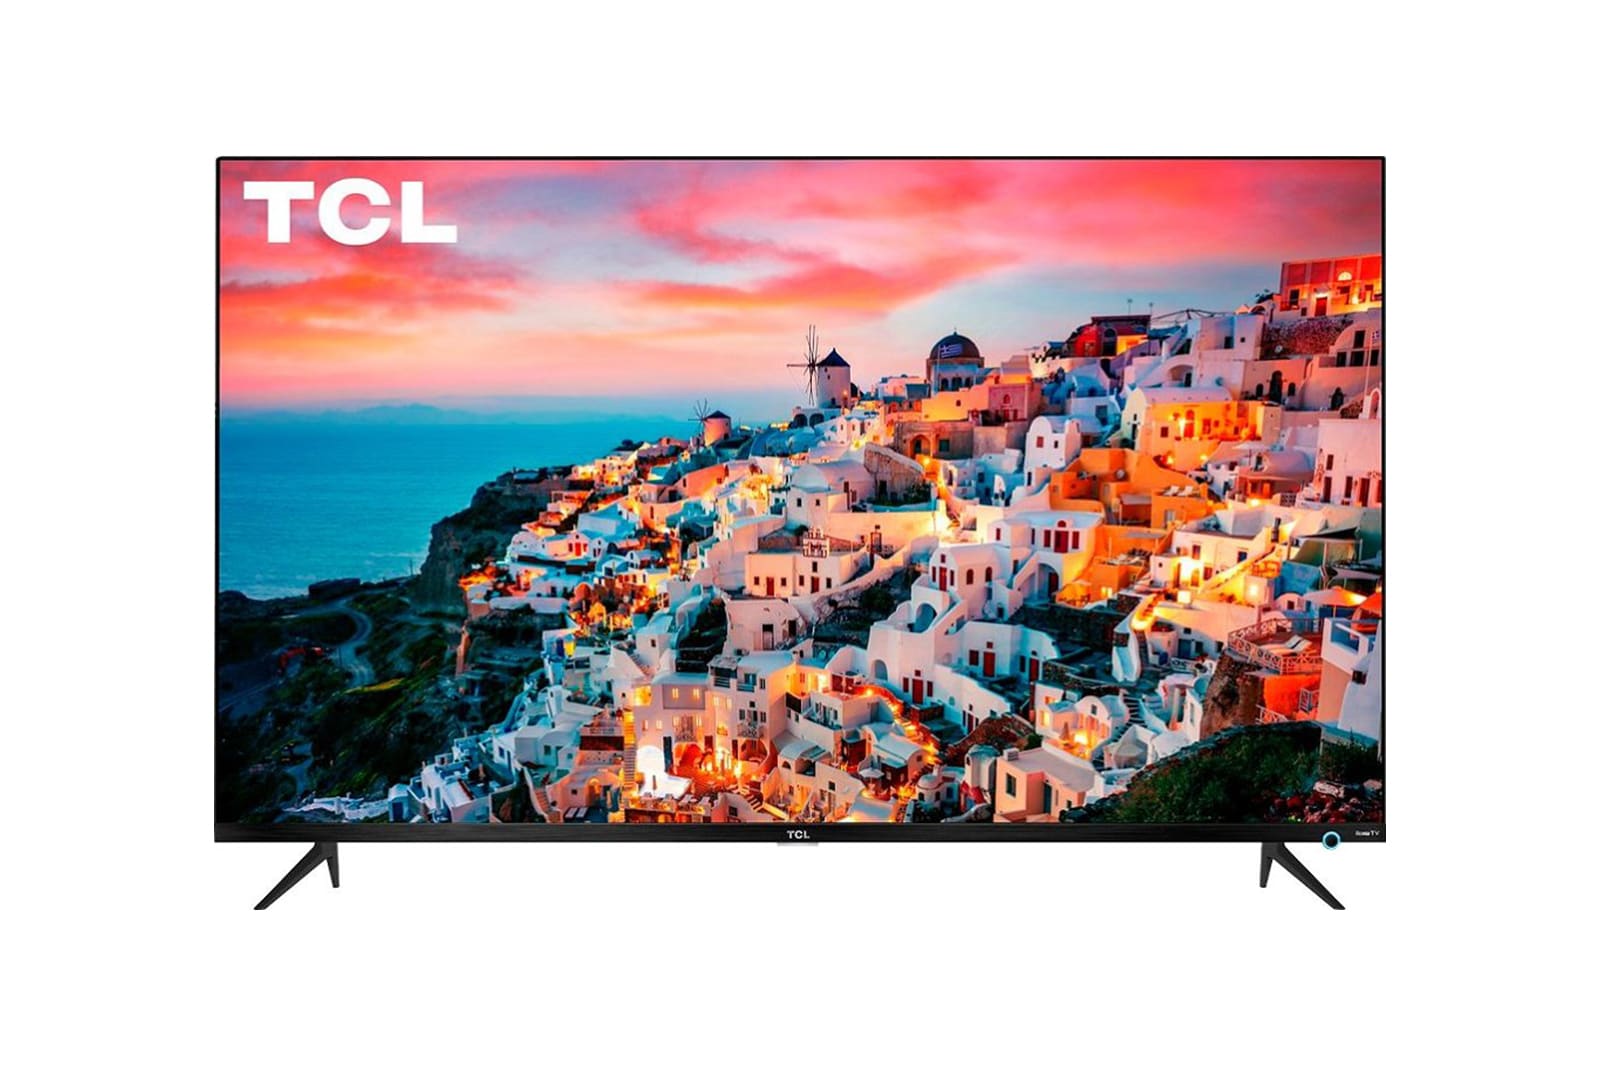 TCL 5 Series 55S525